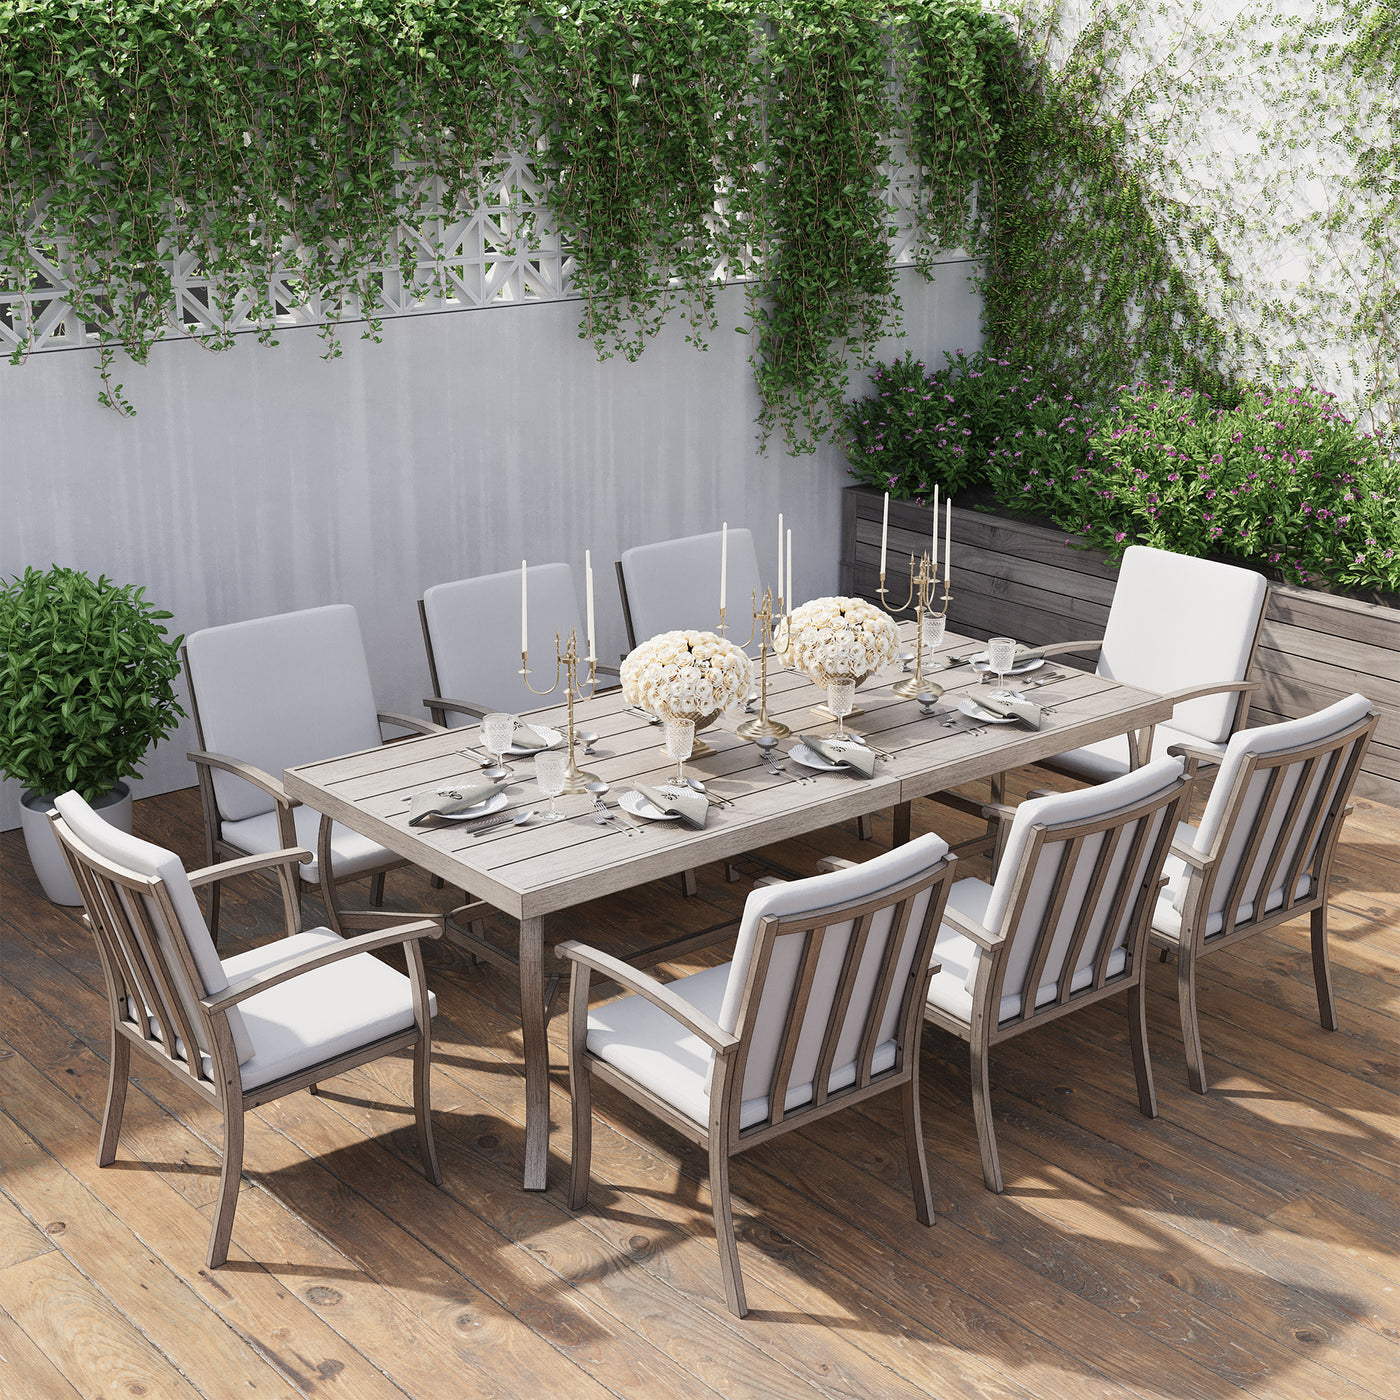 HAPPATIO 9 Piece Patio Dining Set, Aluminum Outdoor Dining Set, Aluminum Dining Table and Chairs Set, Patio Dining Furniture with Aluminum Table, Chairs and Washable Cushions